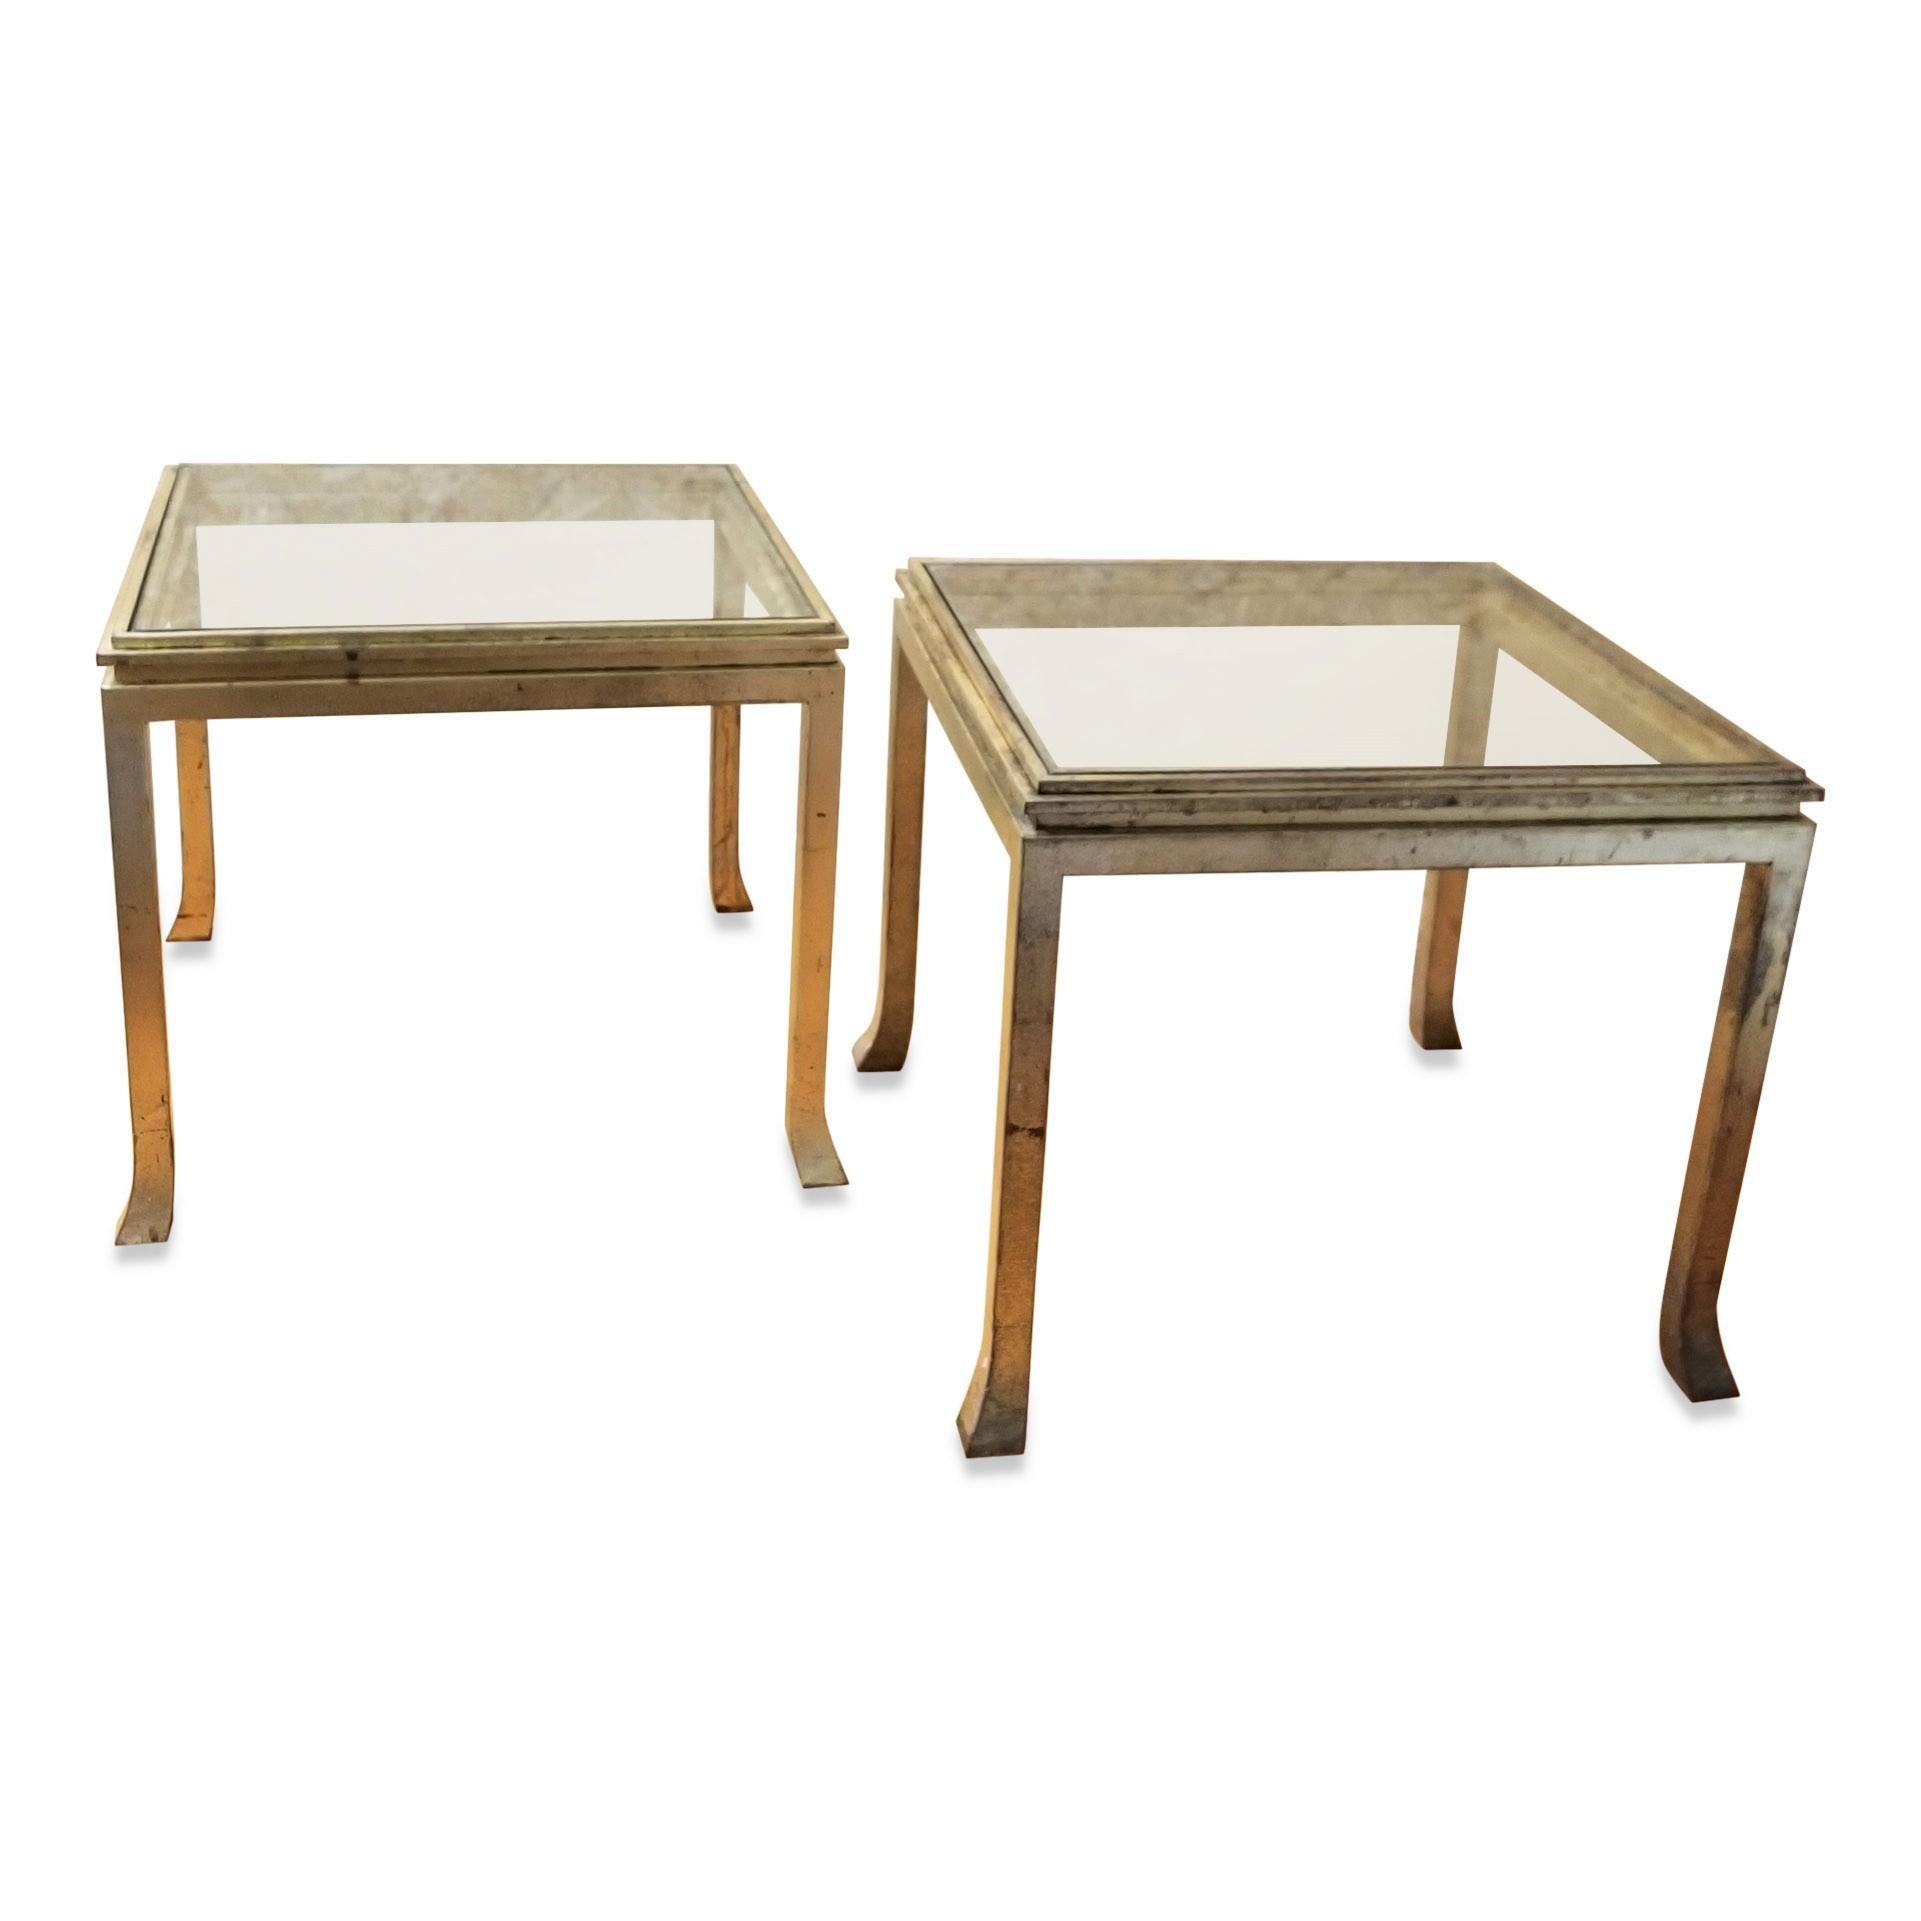 Plated Pair of Gold Leaf Solid Steel End Tables by Maison Ramsay, France, 1970s